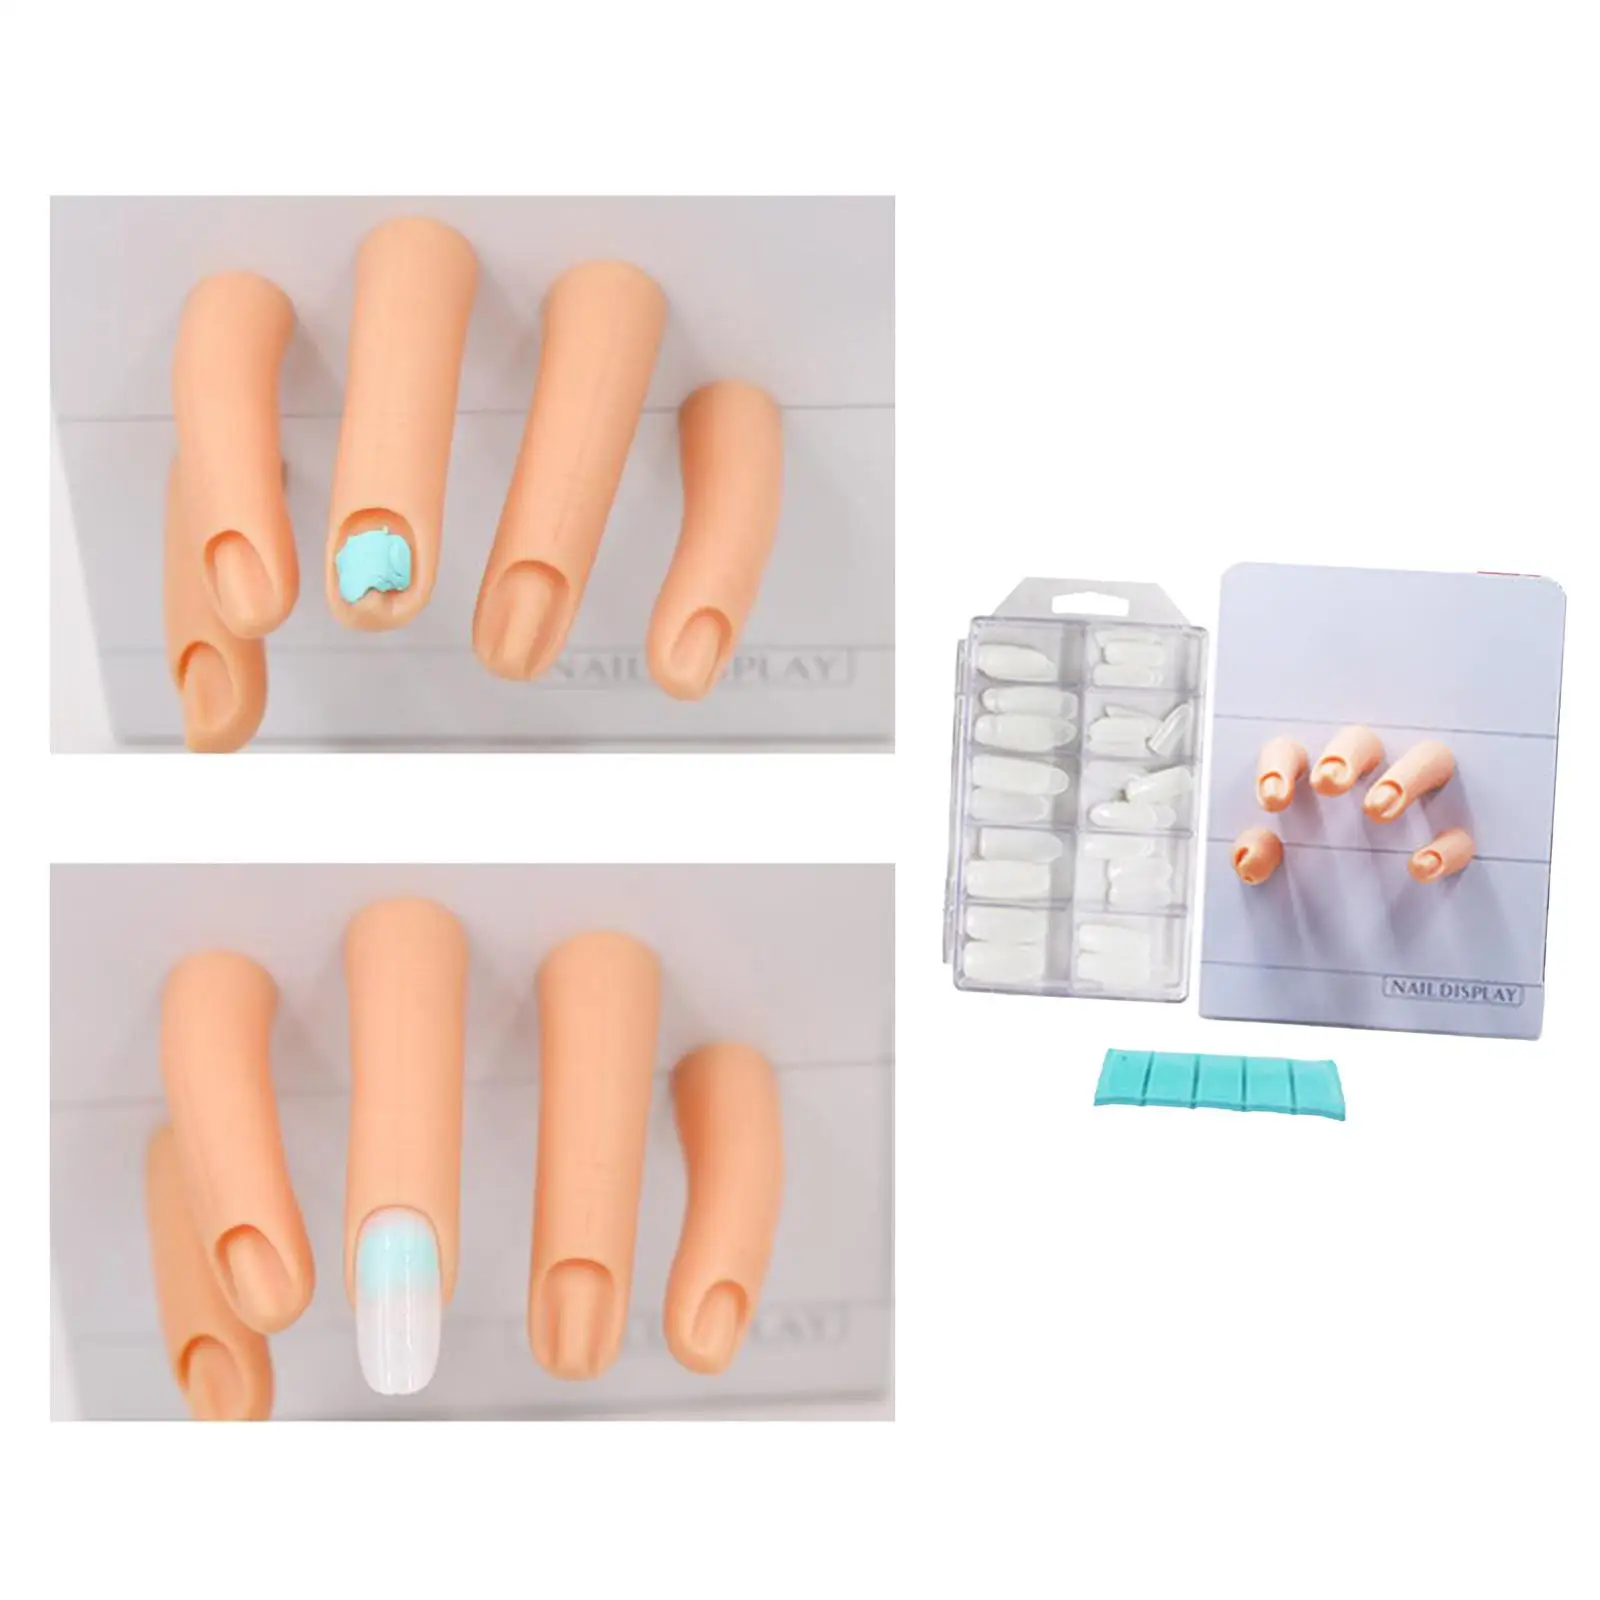 Nail Art Training Tool Manicure Supply Magnetic Plastic Silicone Training Hand for Nail Salon